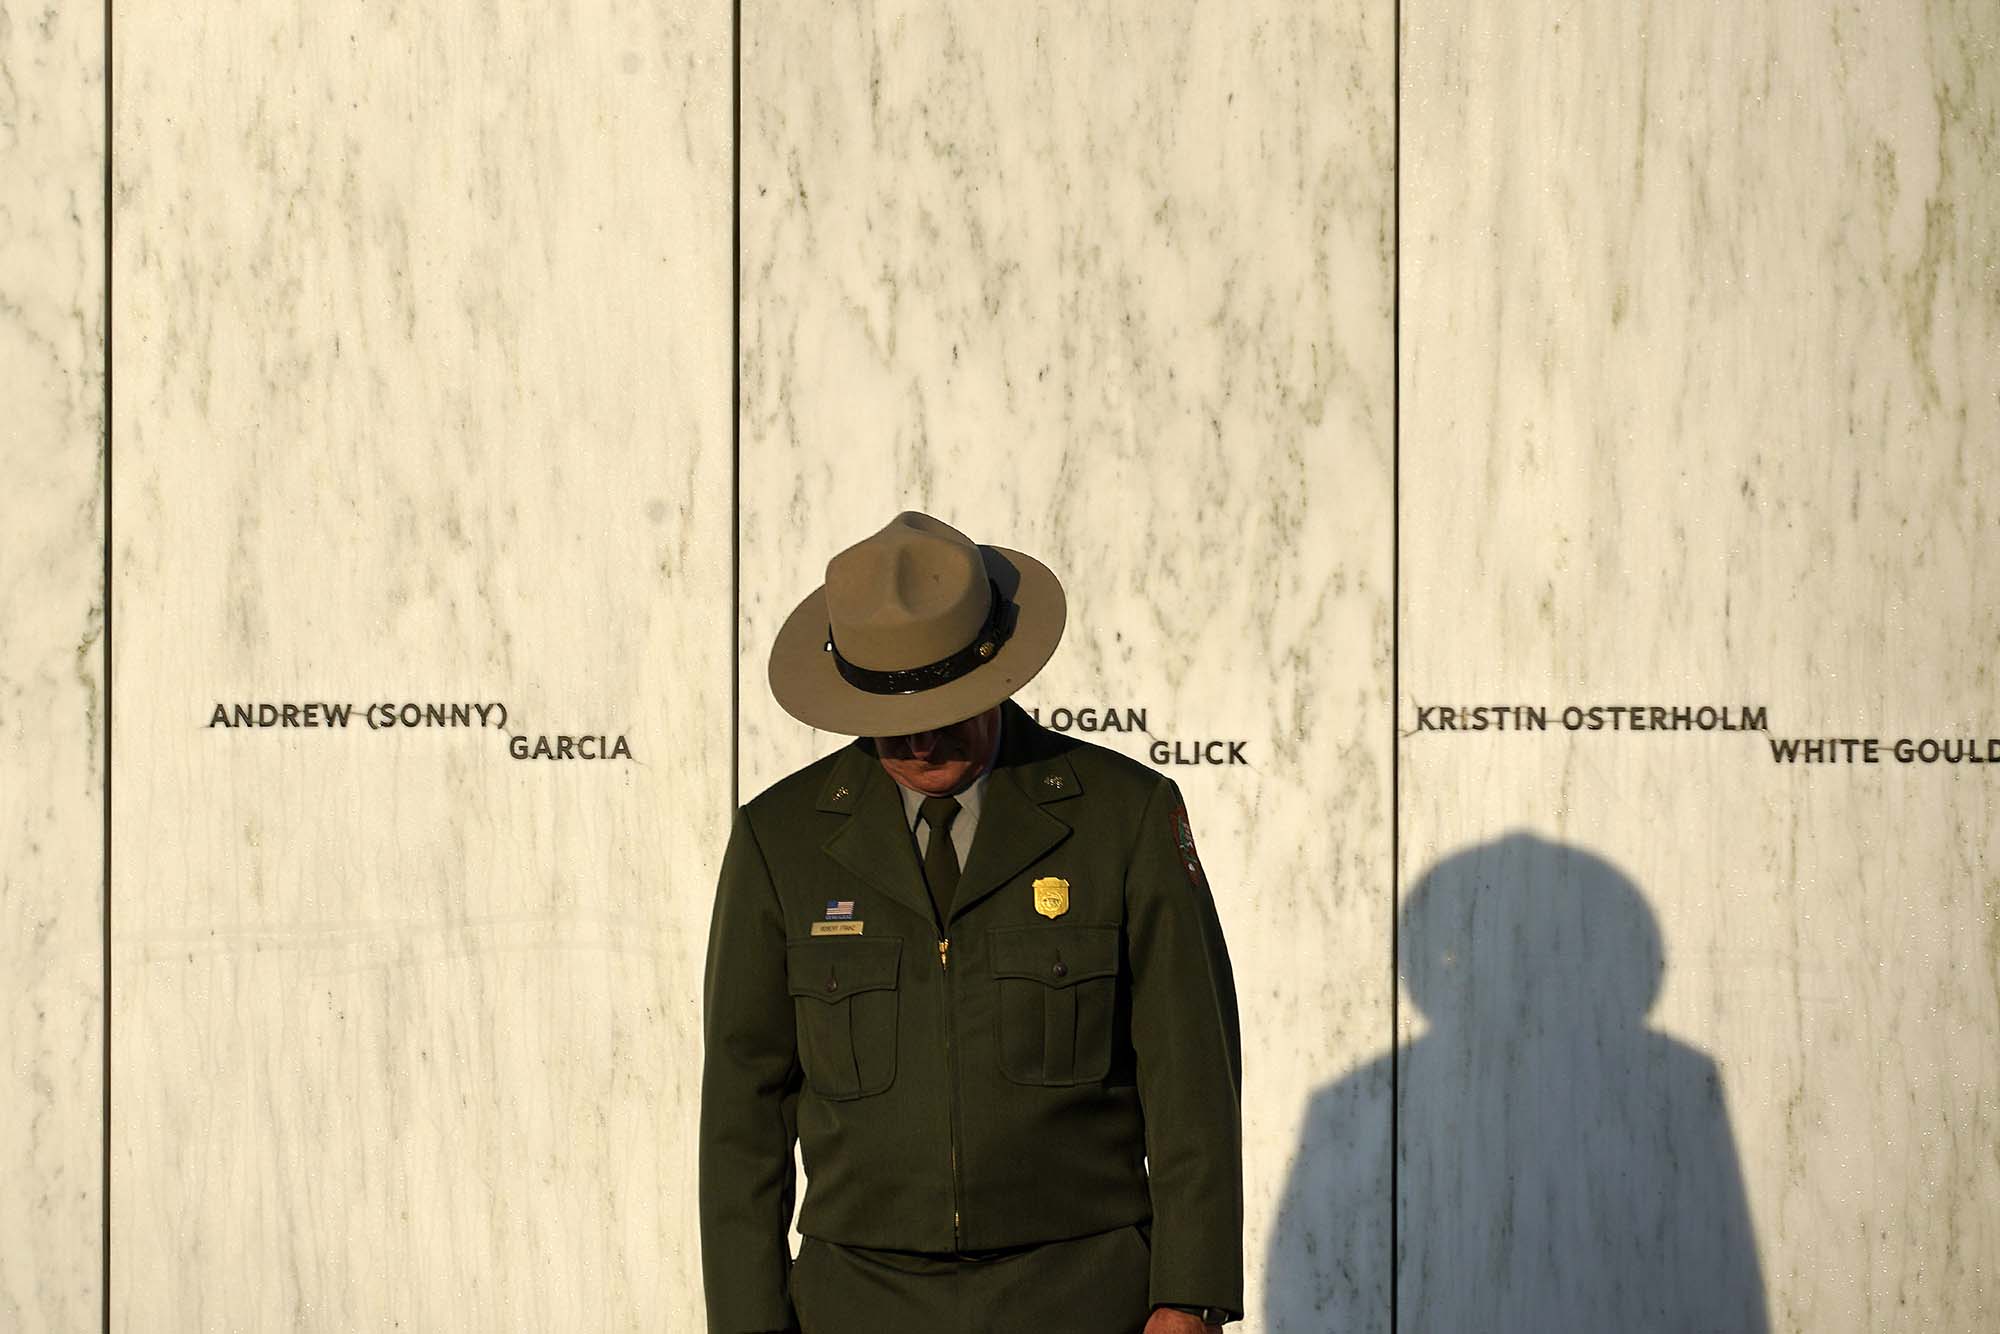 PHOTO: A National Park Service ranger stands in front of the Wall of Names at the Flight 93 National Memorial in Shanksville, Pa. before a Service of Remembrance, Sept. 11, 2021.